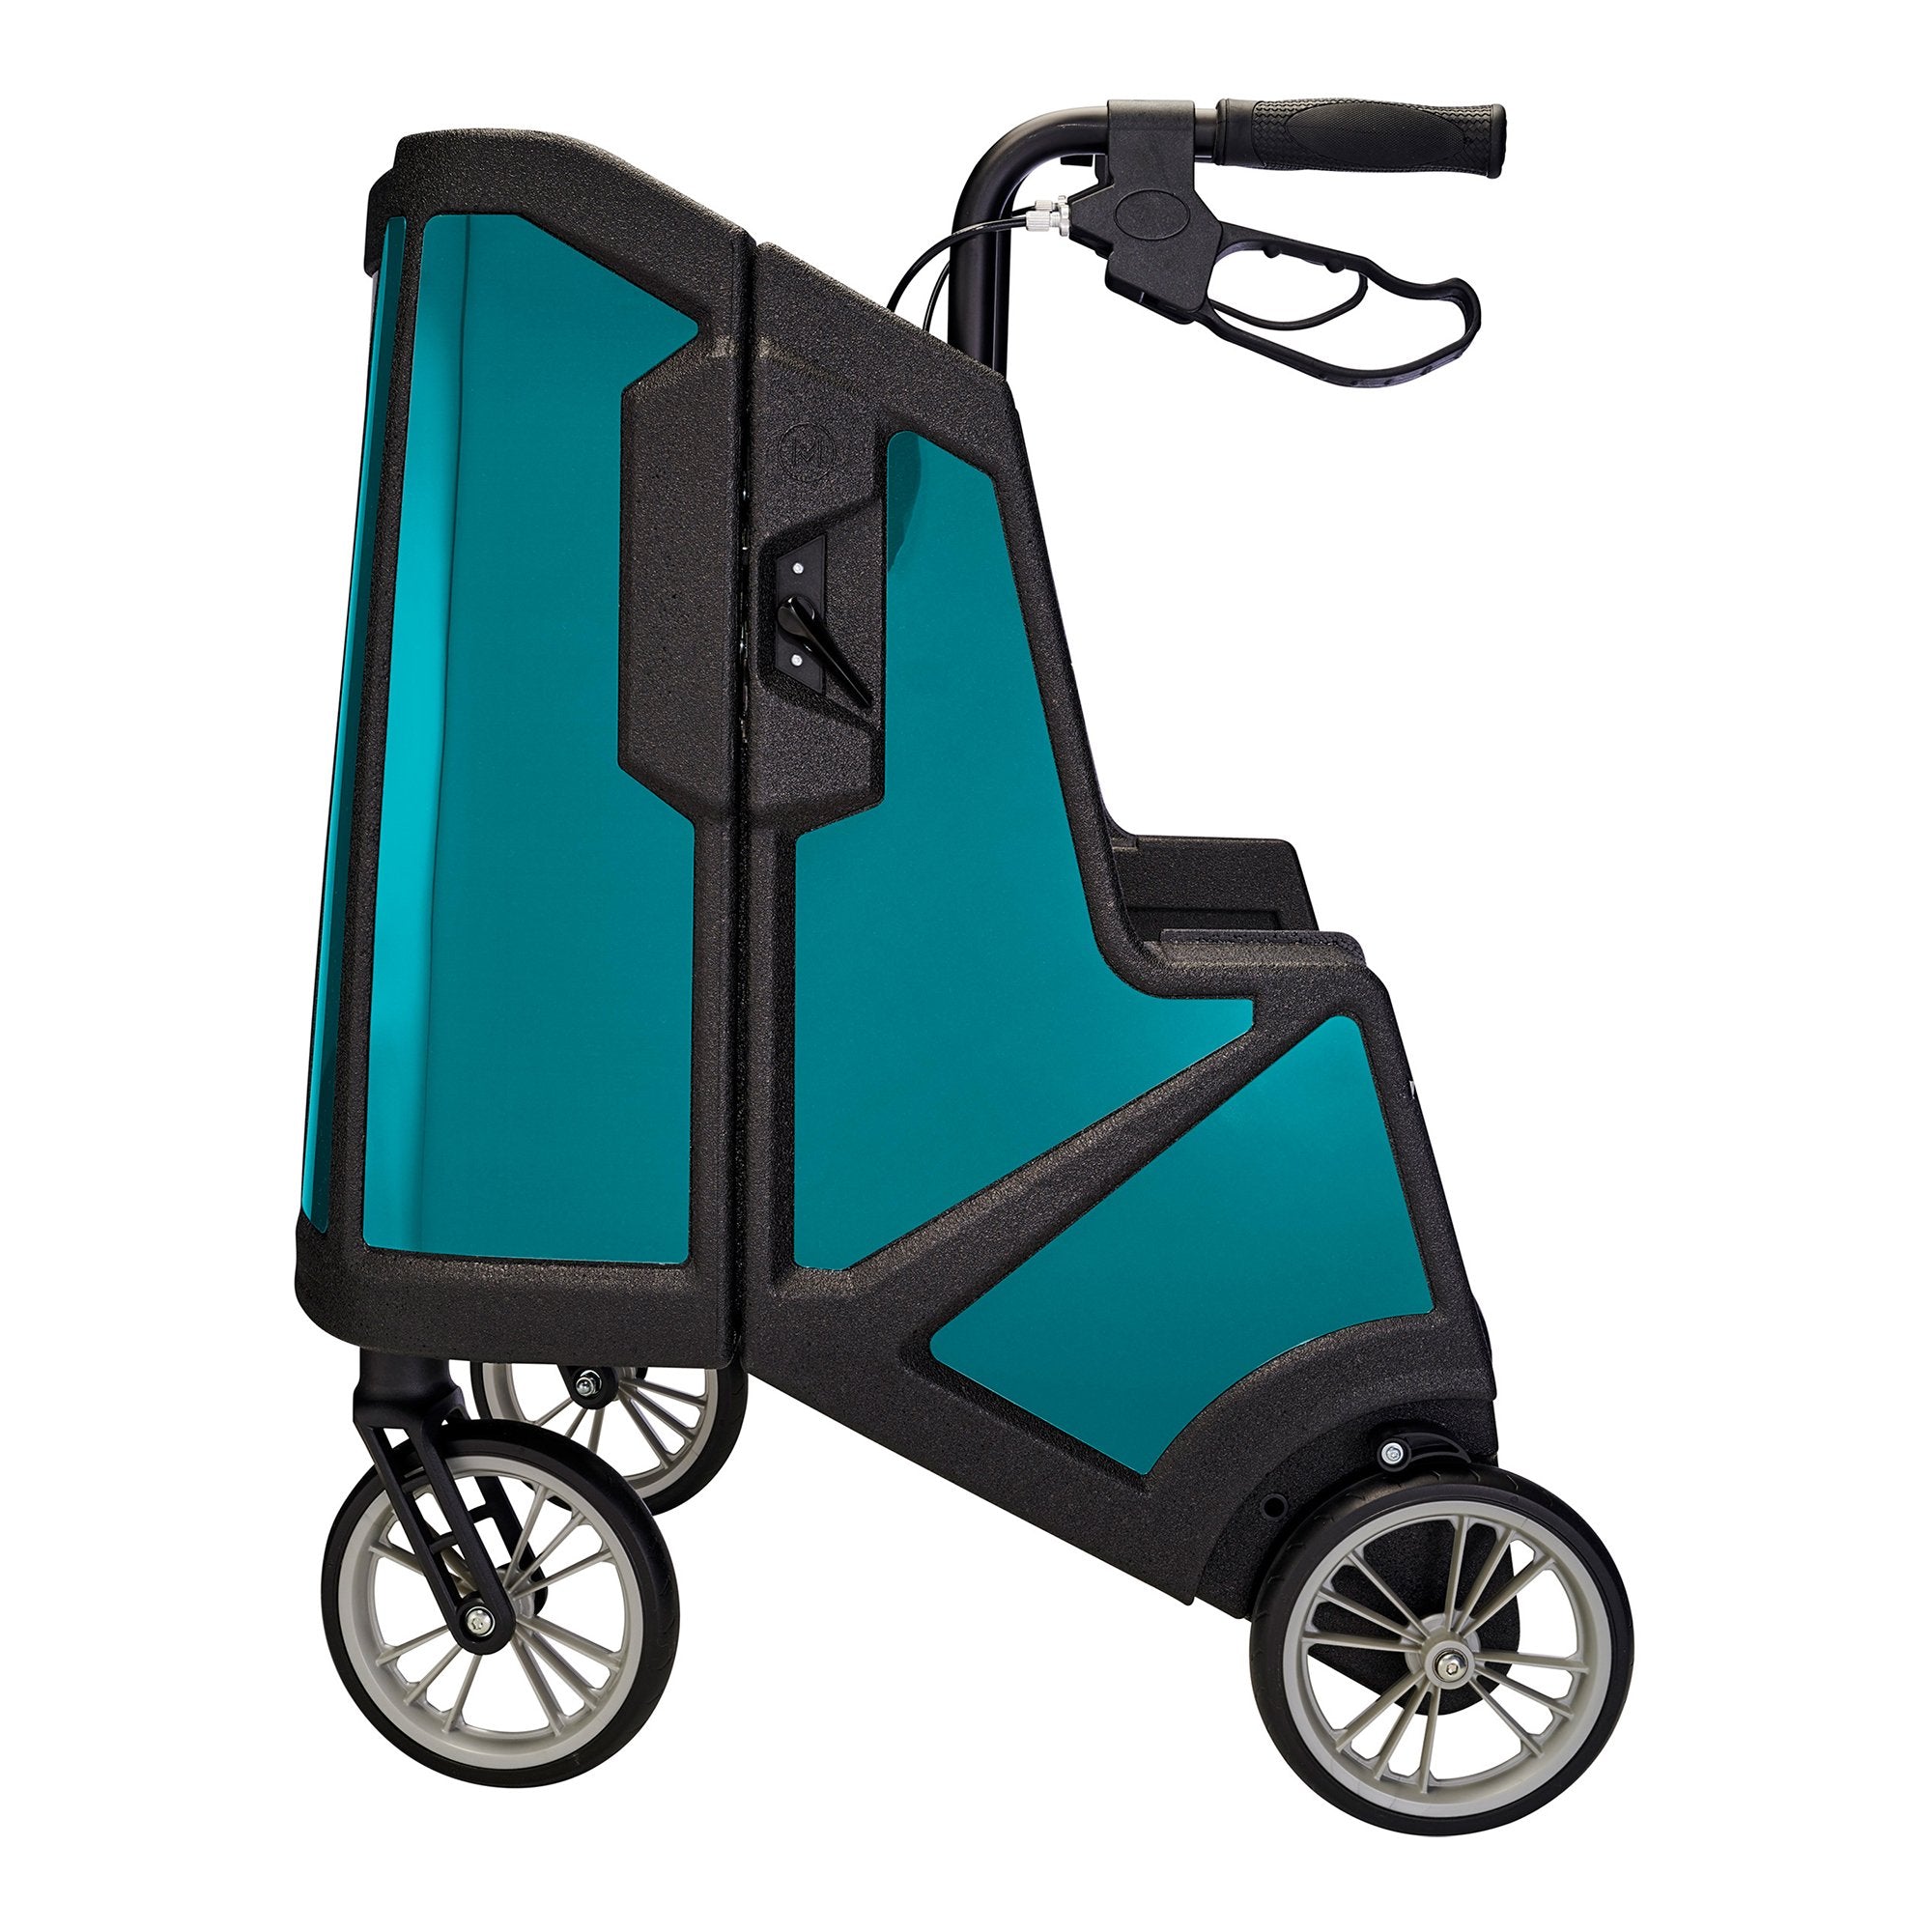 Tour Four-Wheel Rollator, 31 to 37 Inch Handle Height, Ocean Teal (1 Unit)